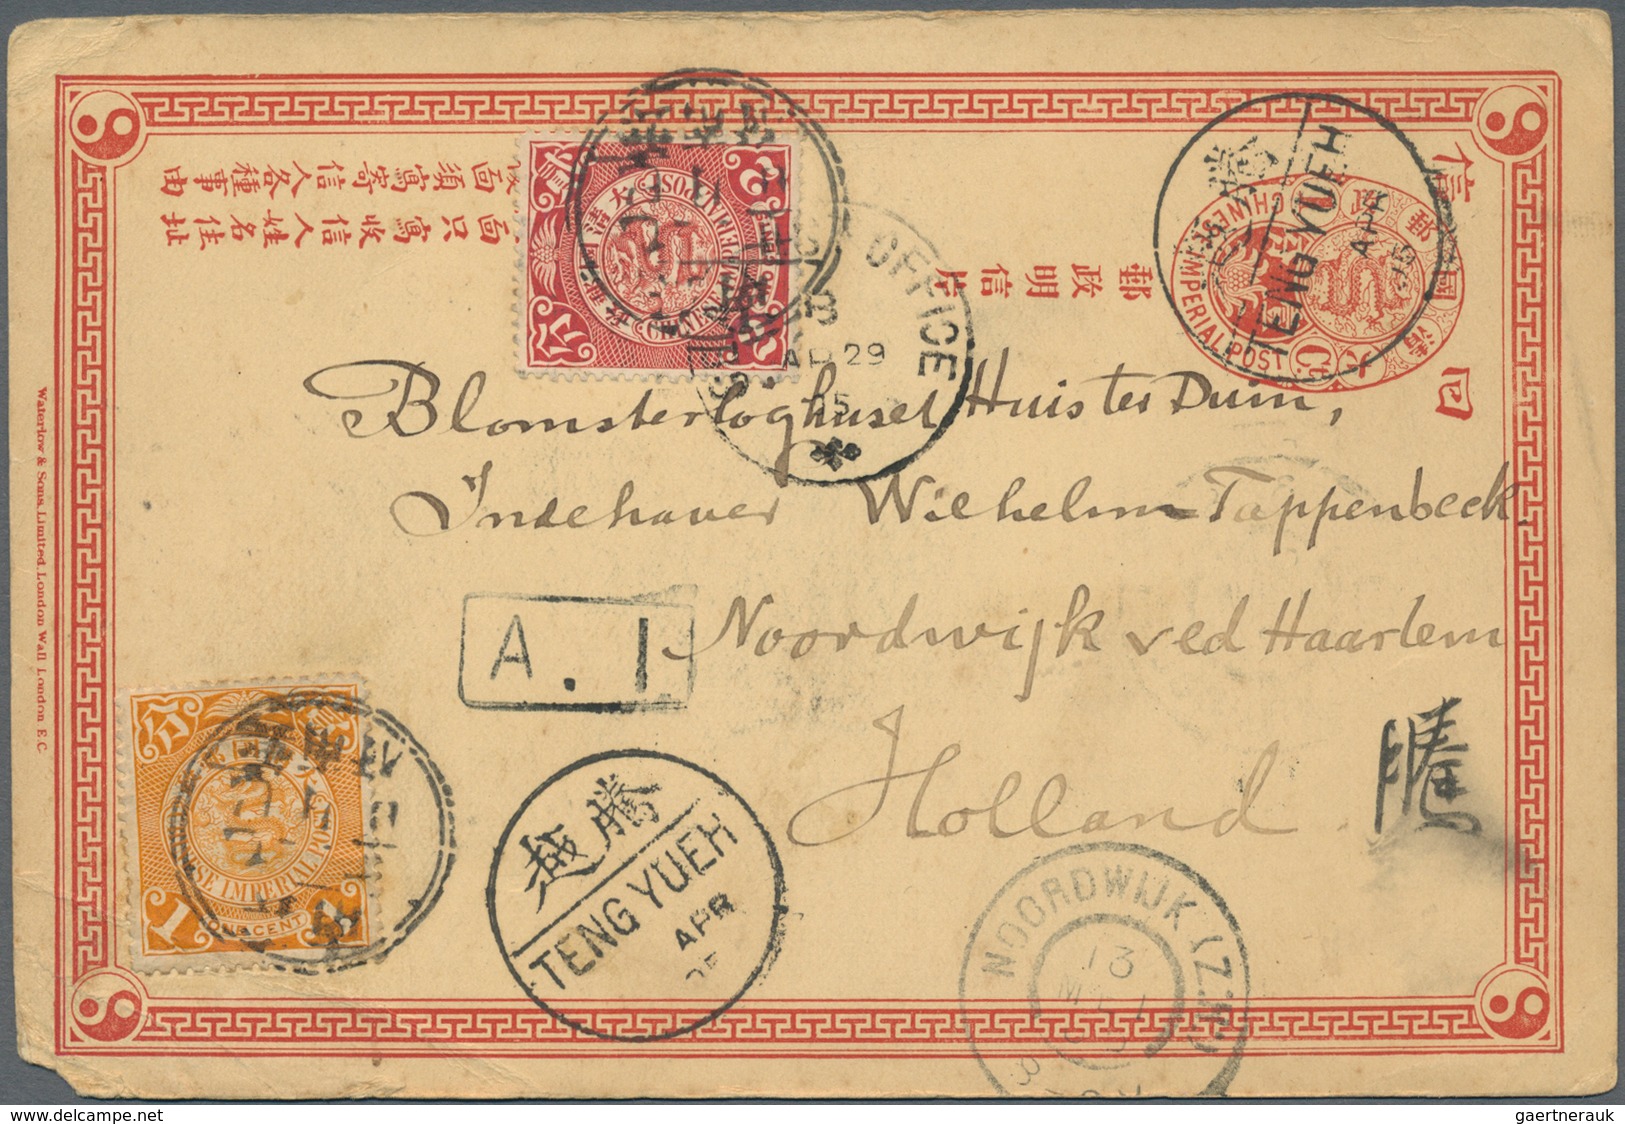 China - Ganzsachen: 1898, Card ICP 1 C. Reply Part Uprated Coiling Dragon 1 C., 2 C. Tied Lunar Date - Postcards